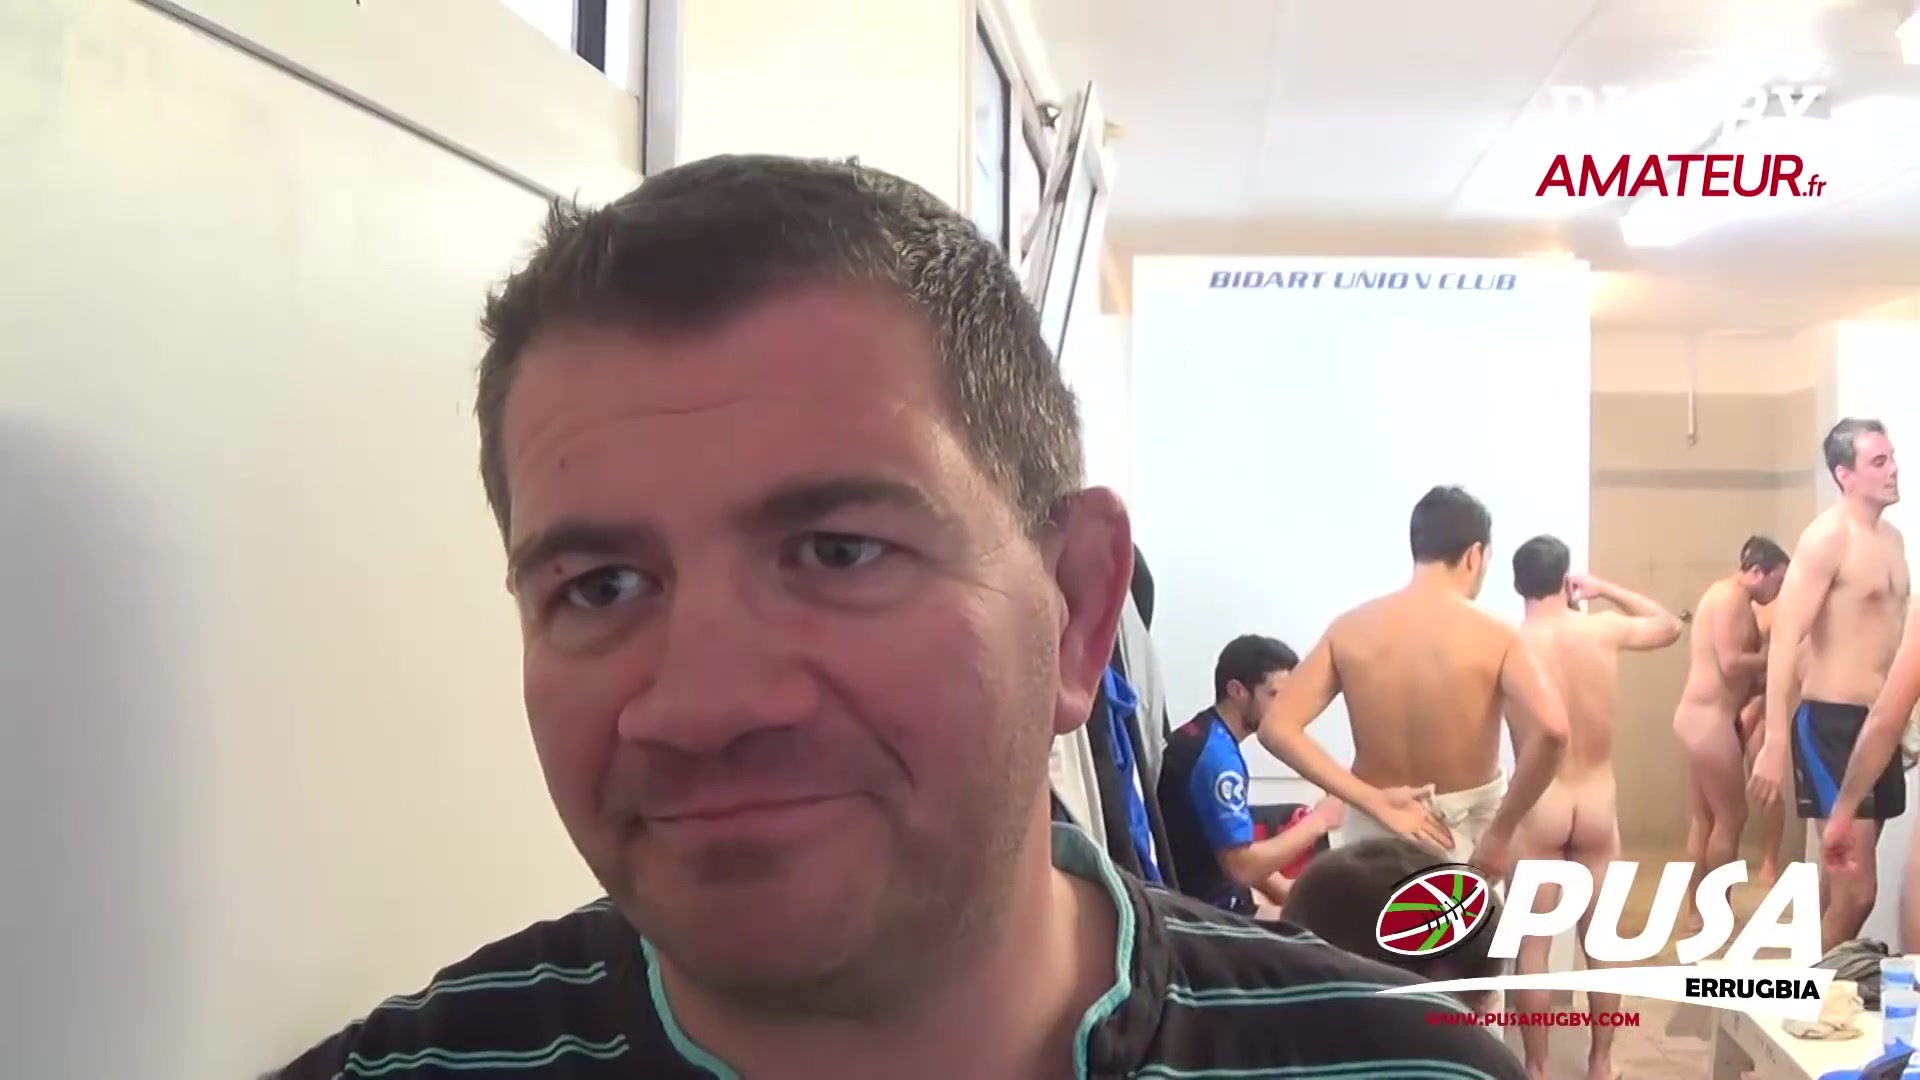 French rugby interview - lads showering in background